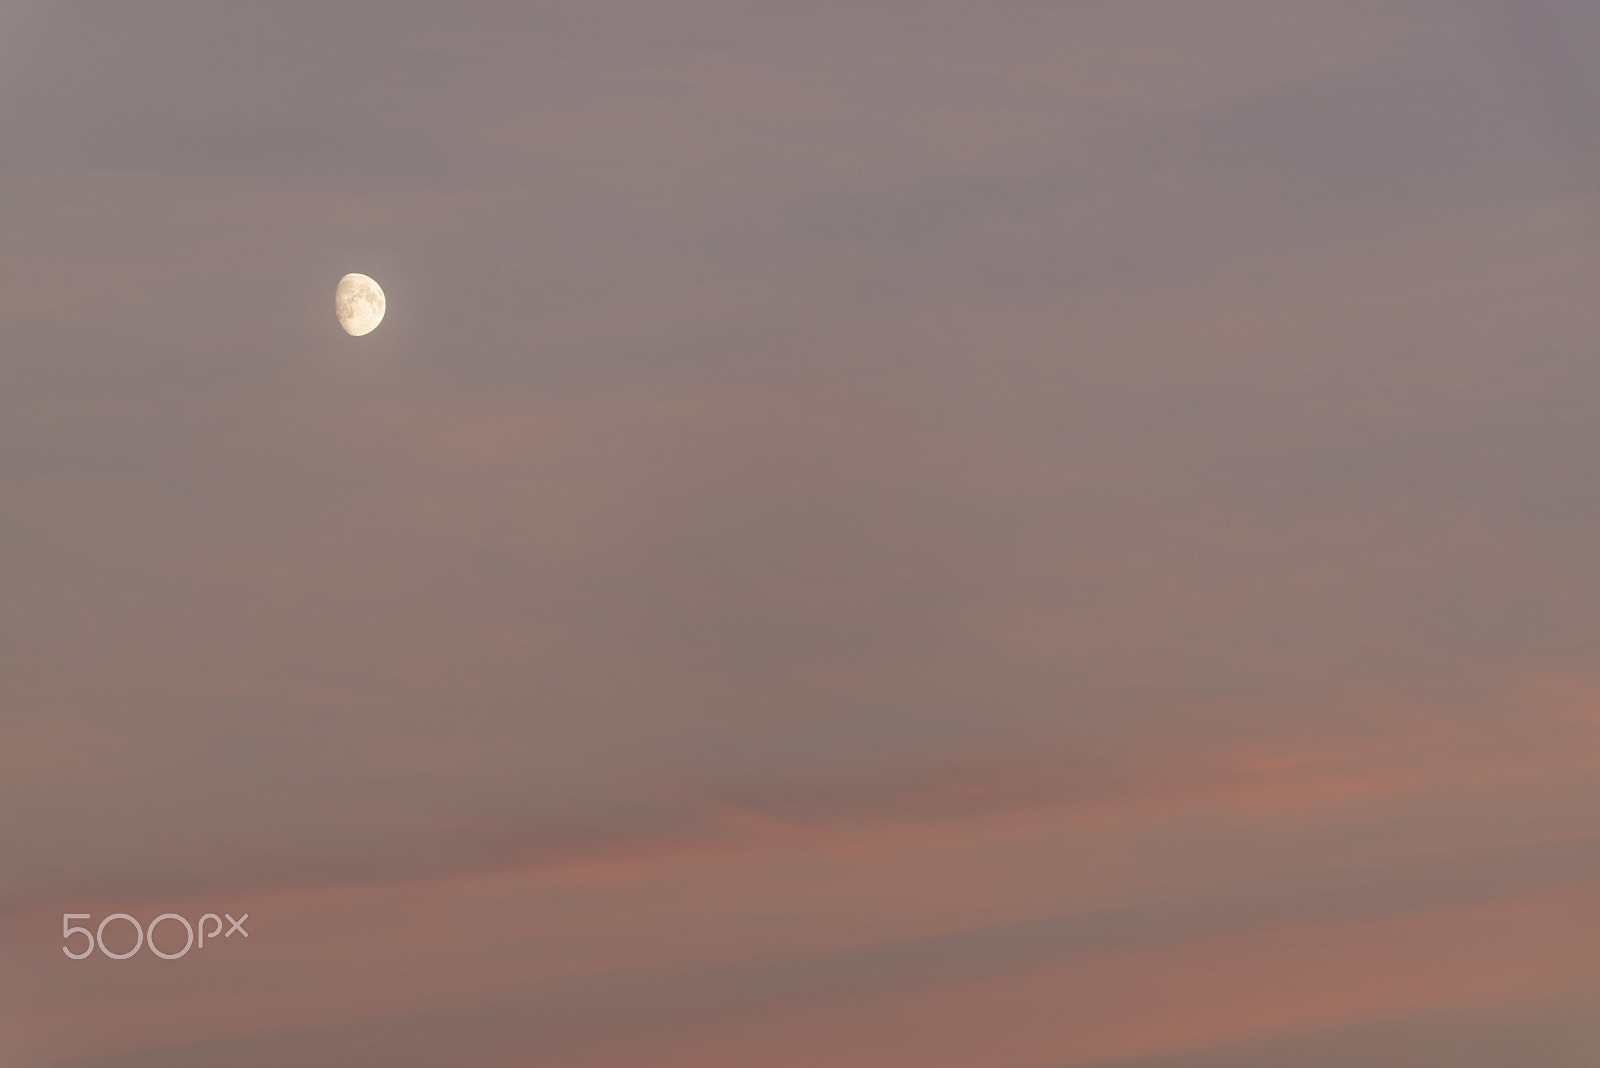 Nikon D800 + Sigma 150-600mm F5-6.3 DG OS HSM | S sample photo. The moon in sunset photography